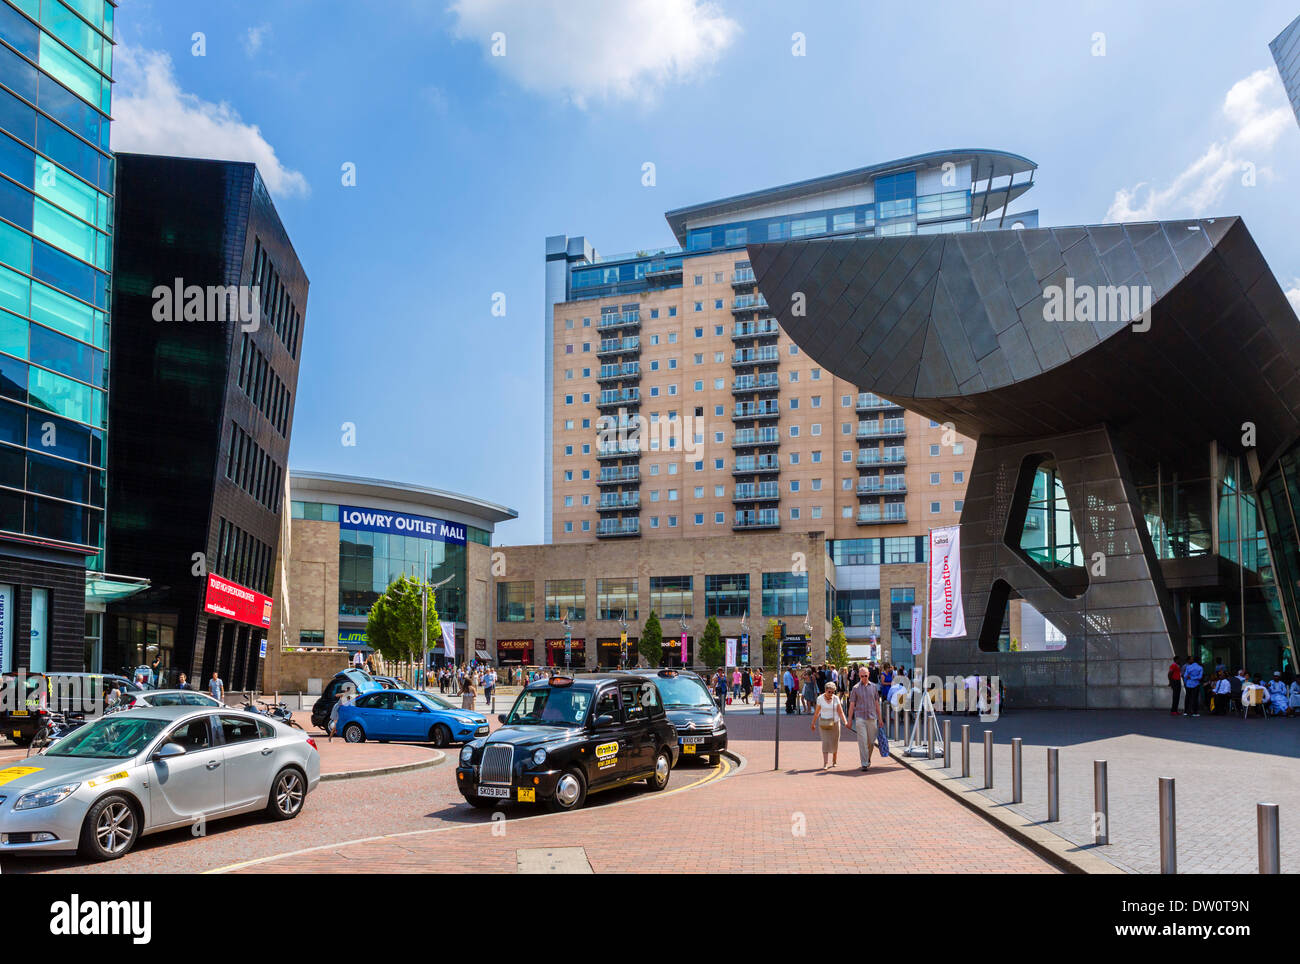 Die Lowry Theater und Lowry Outlet Mall, Salford Quays, Manchester, UK Stockfoto